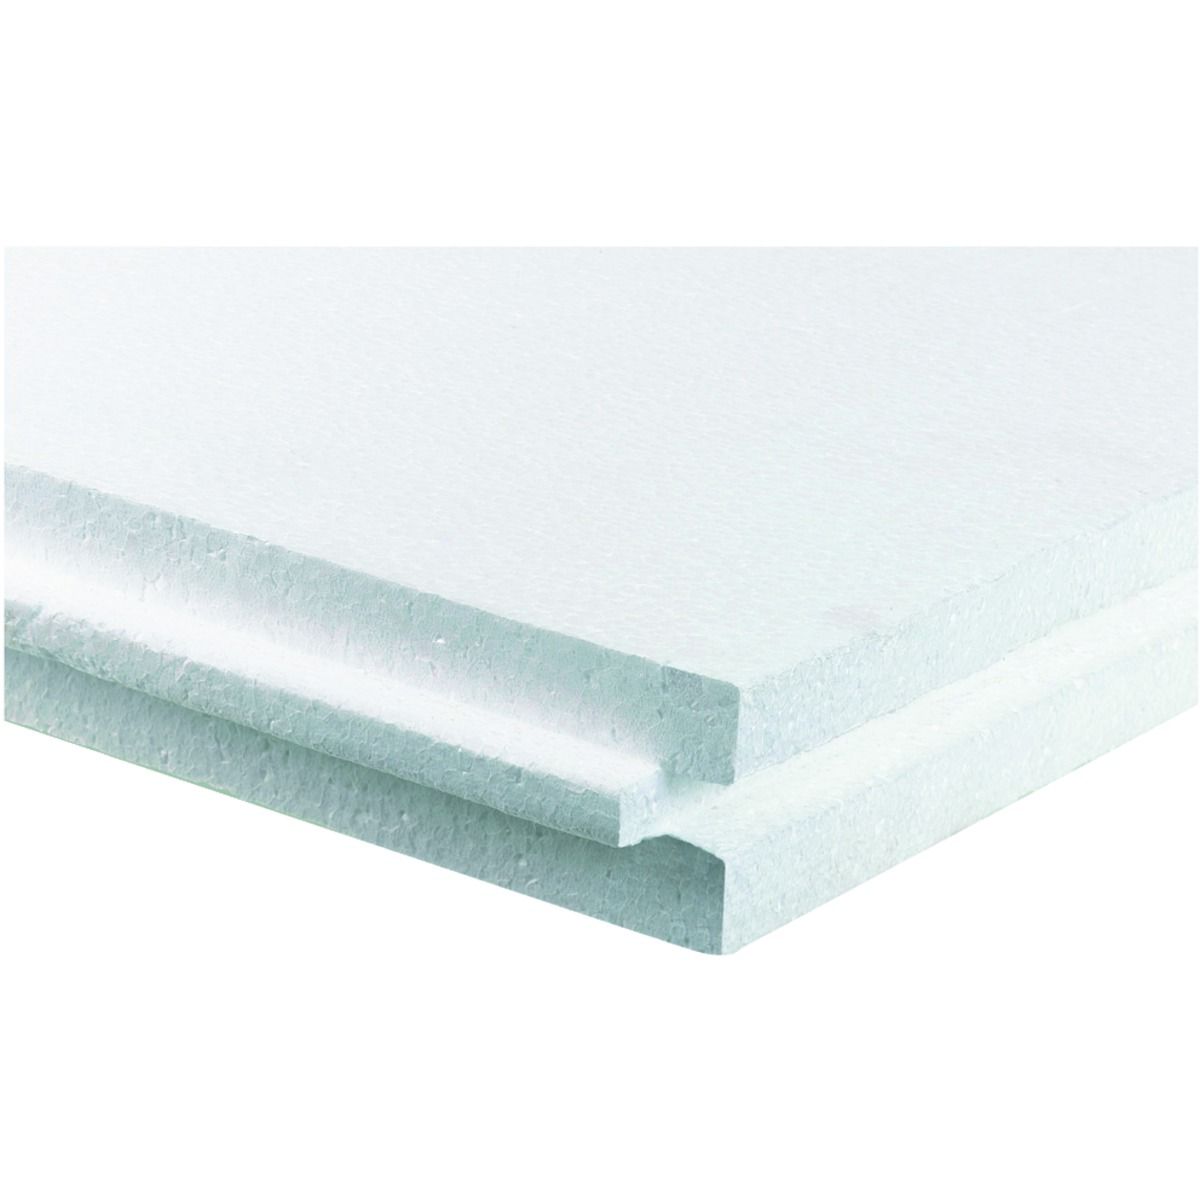 Image of Wickes T & G Polystyrene Insulation Board EPS 70E - 1200mm x 450mm x 50mm